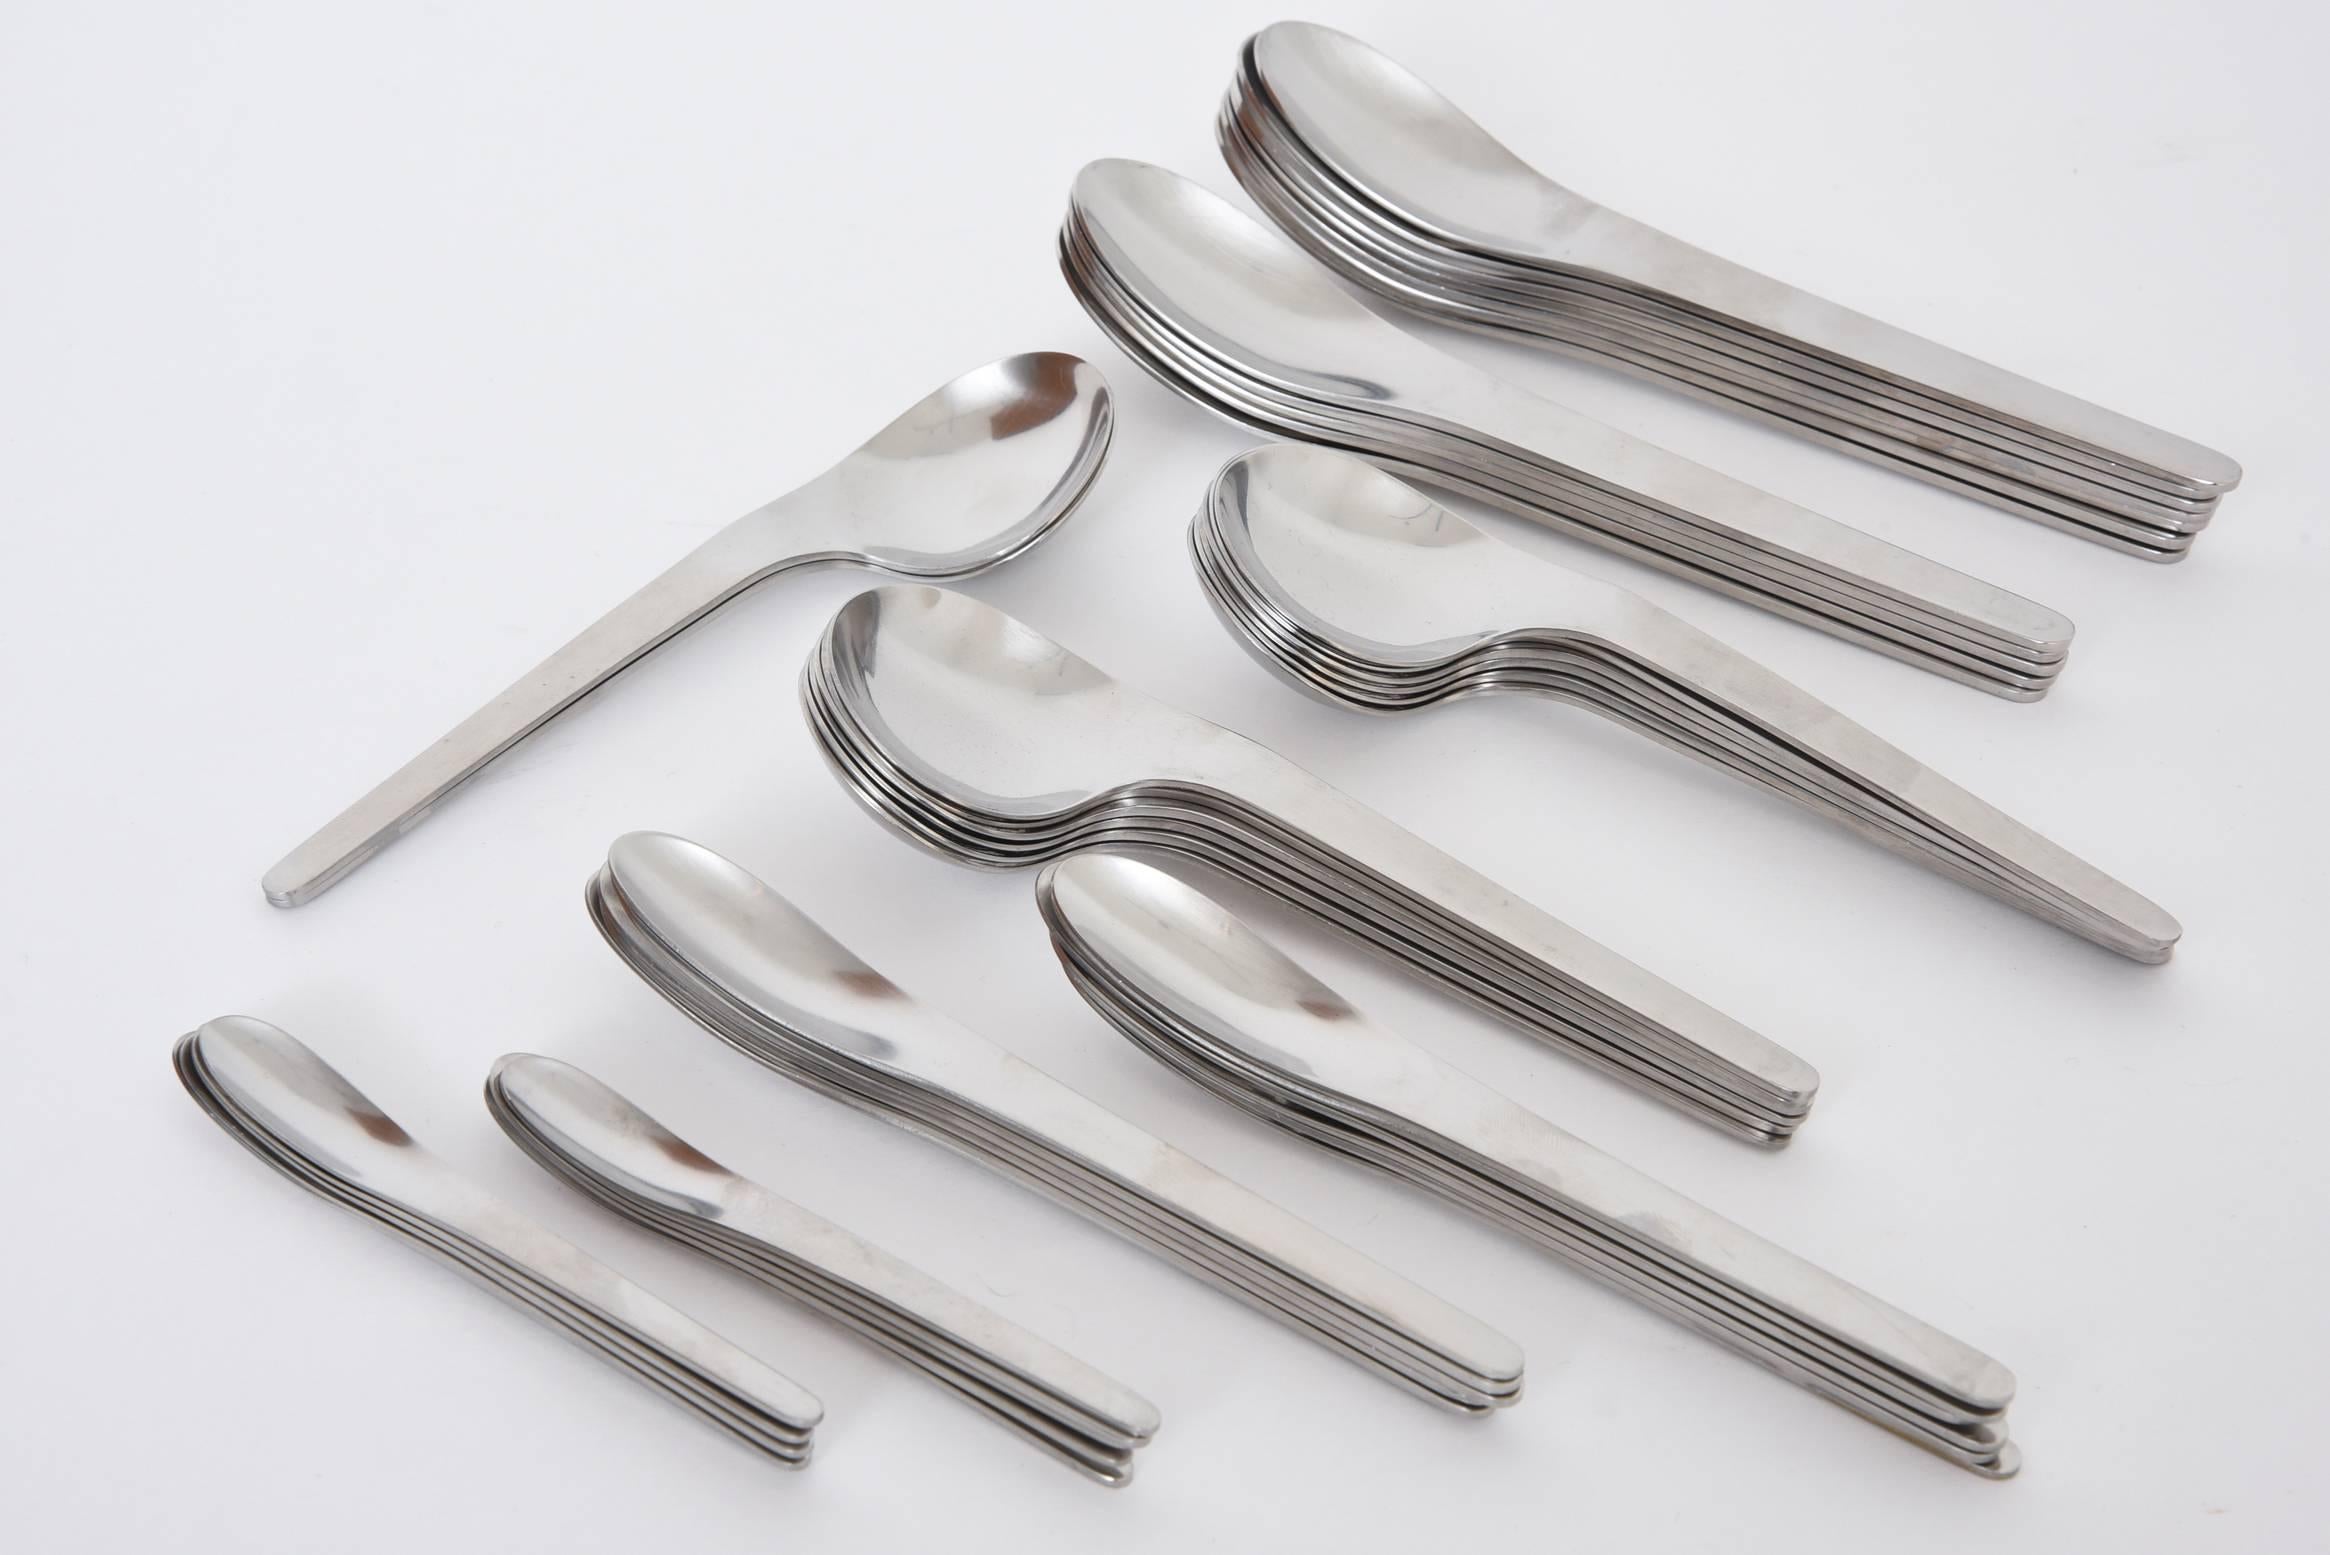 20th Century Arne Jacobsen by Michelsen Space Age Modernist Stainless Flatware Set 106 Pieces